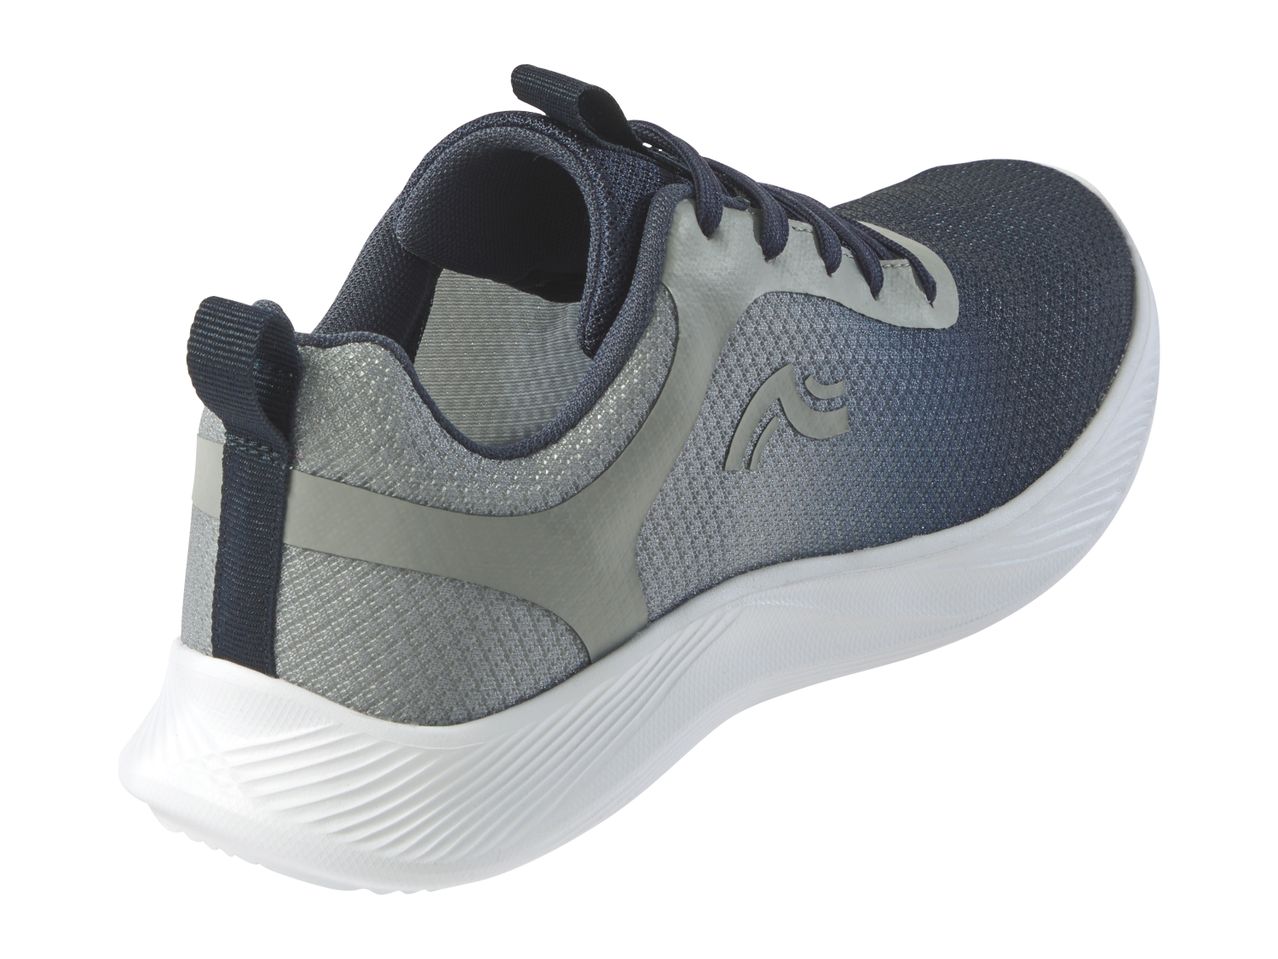 Go to full screen view: Crivit Men’s Trainers - Image 1